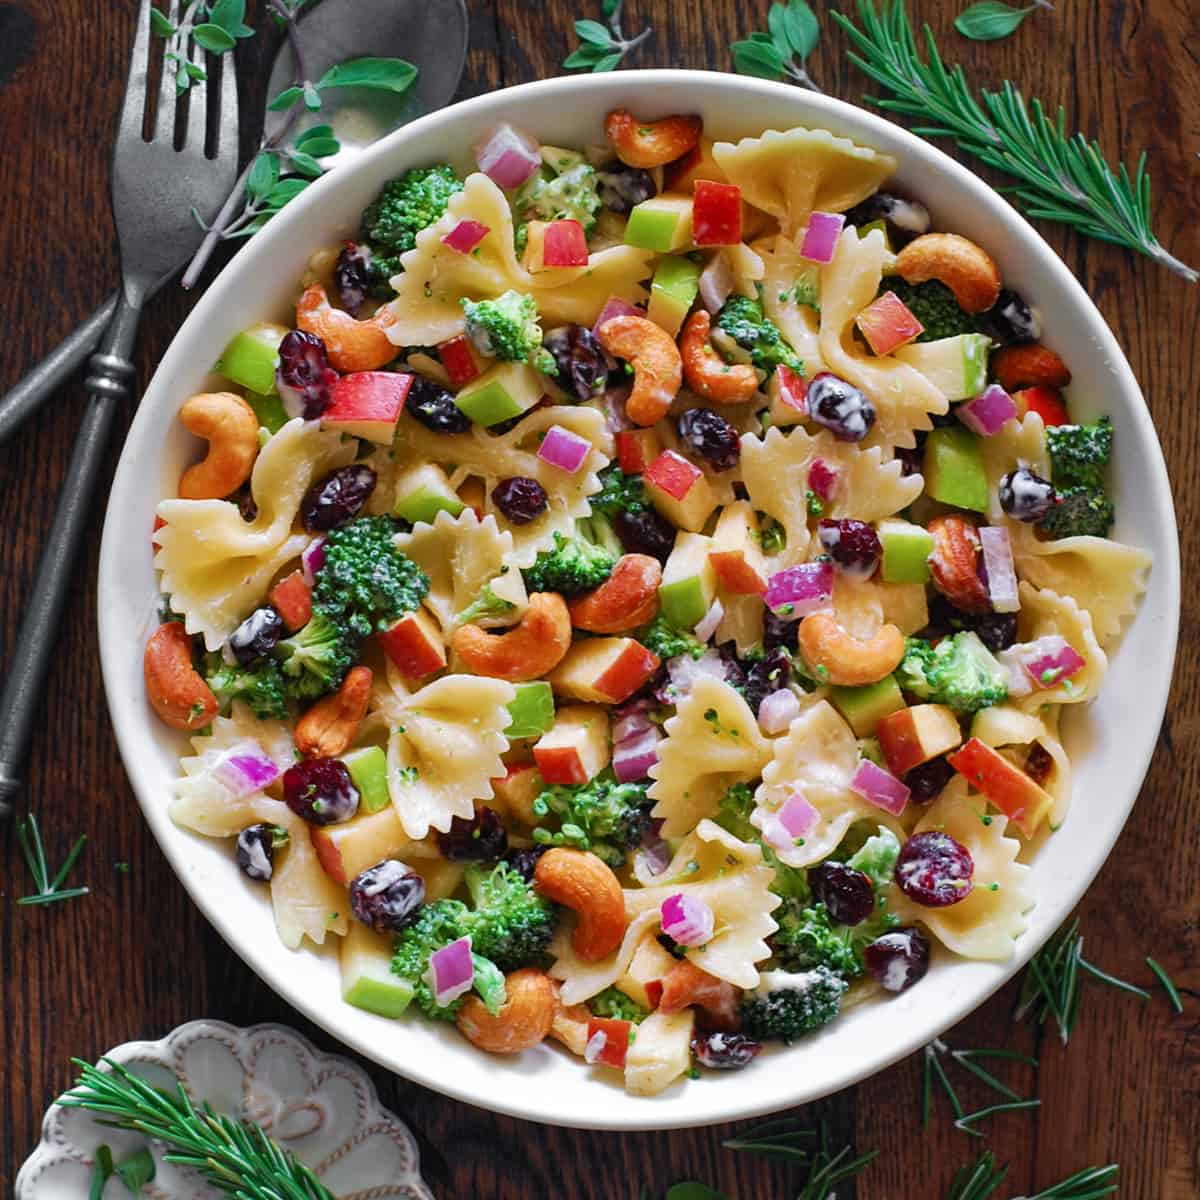 Broccoli Pasta Salad with Cranberries, Apples, Cashews, and Red Onions in a white bowl.